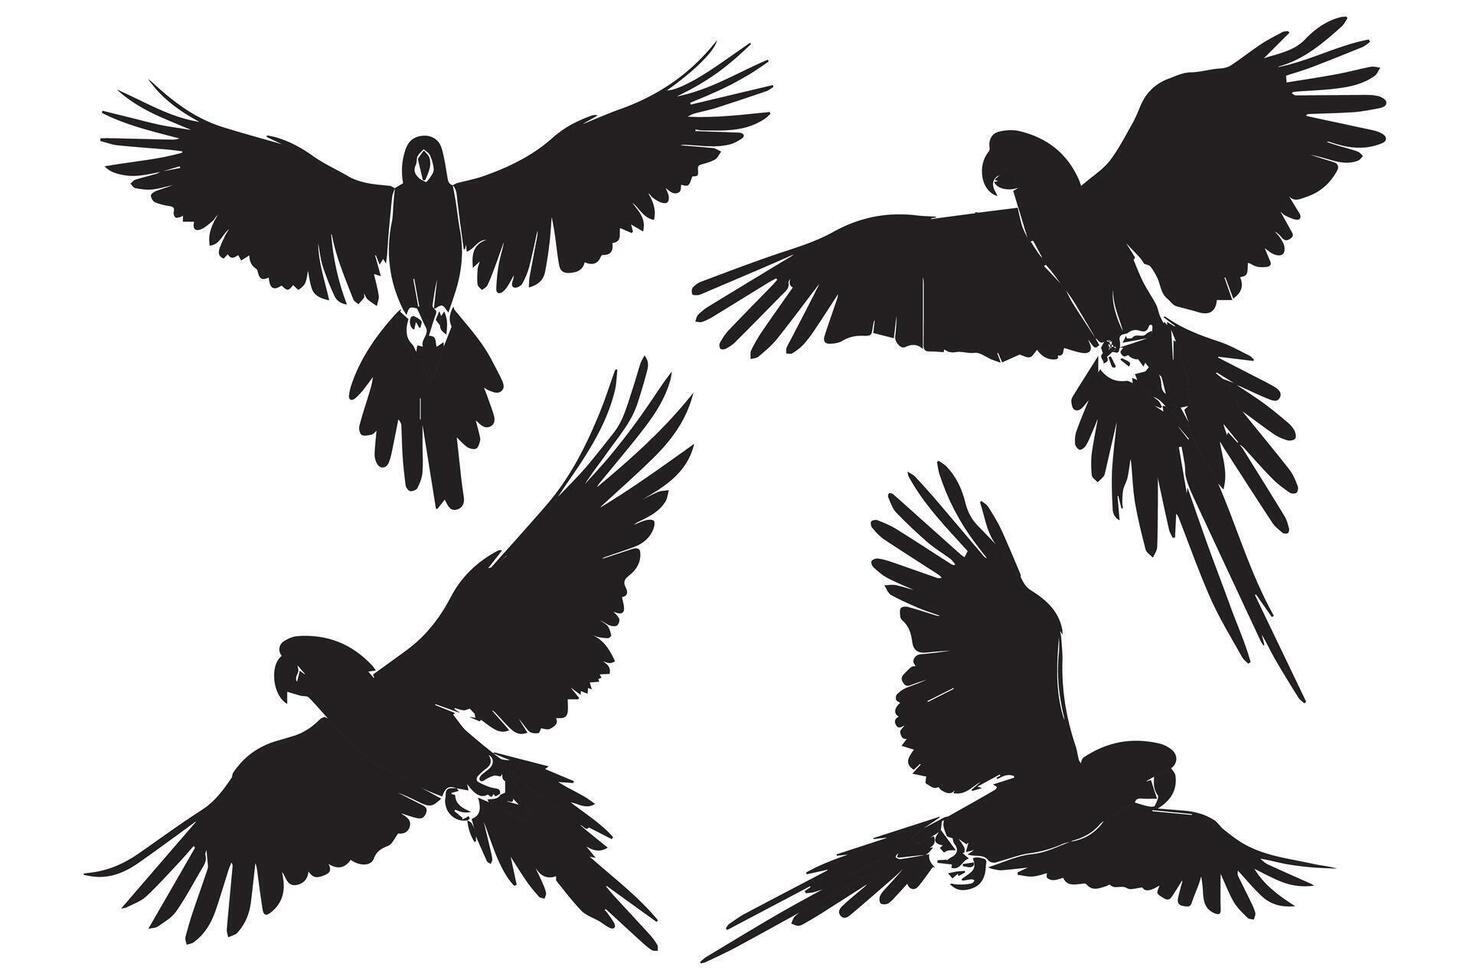 Set of silhouettes of parrots. Collection of tropical birds from the Amazon jungle. Domestic parrot on a sit on a stand.illustration on a white background vector